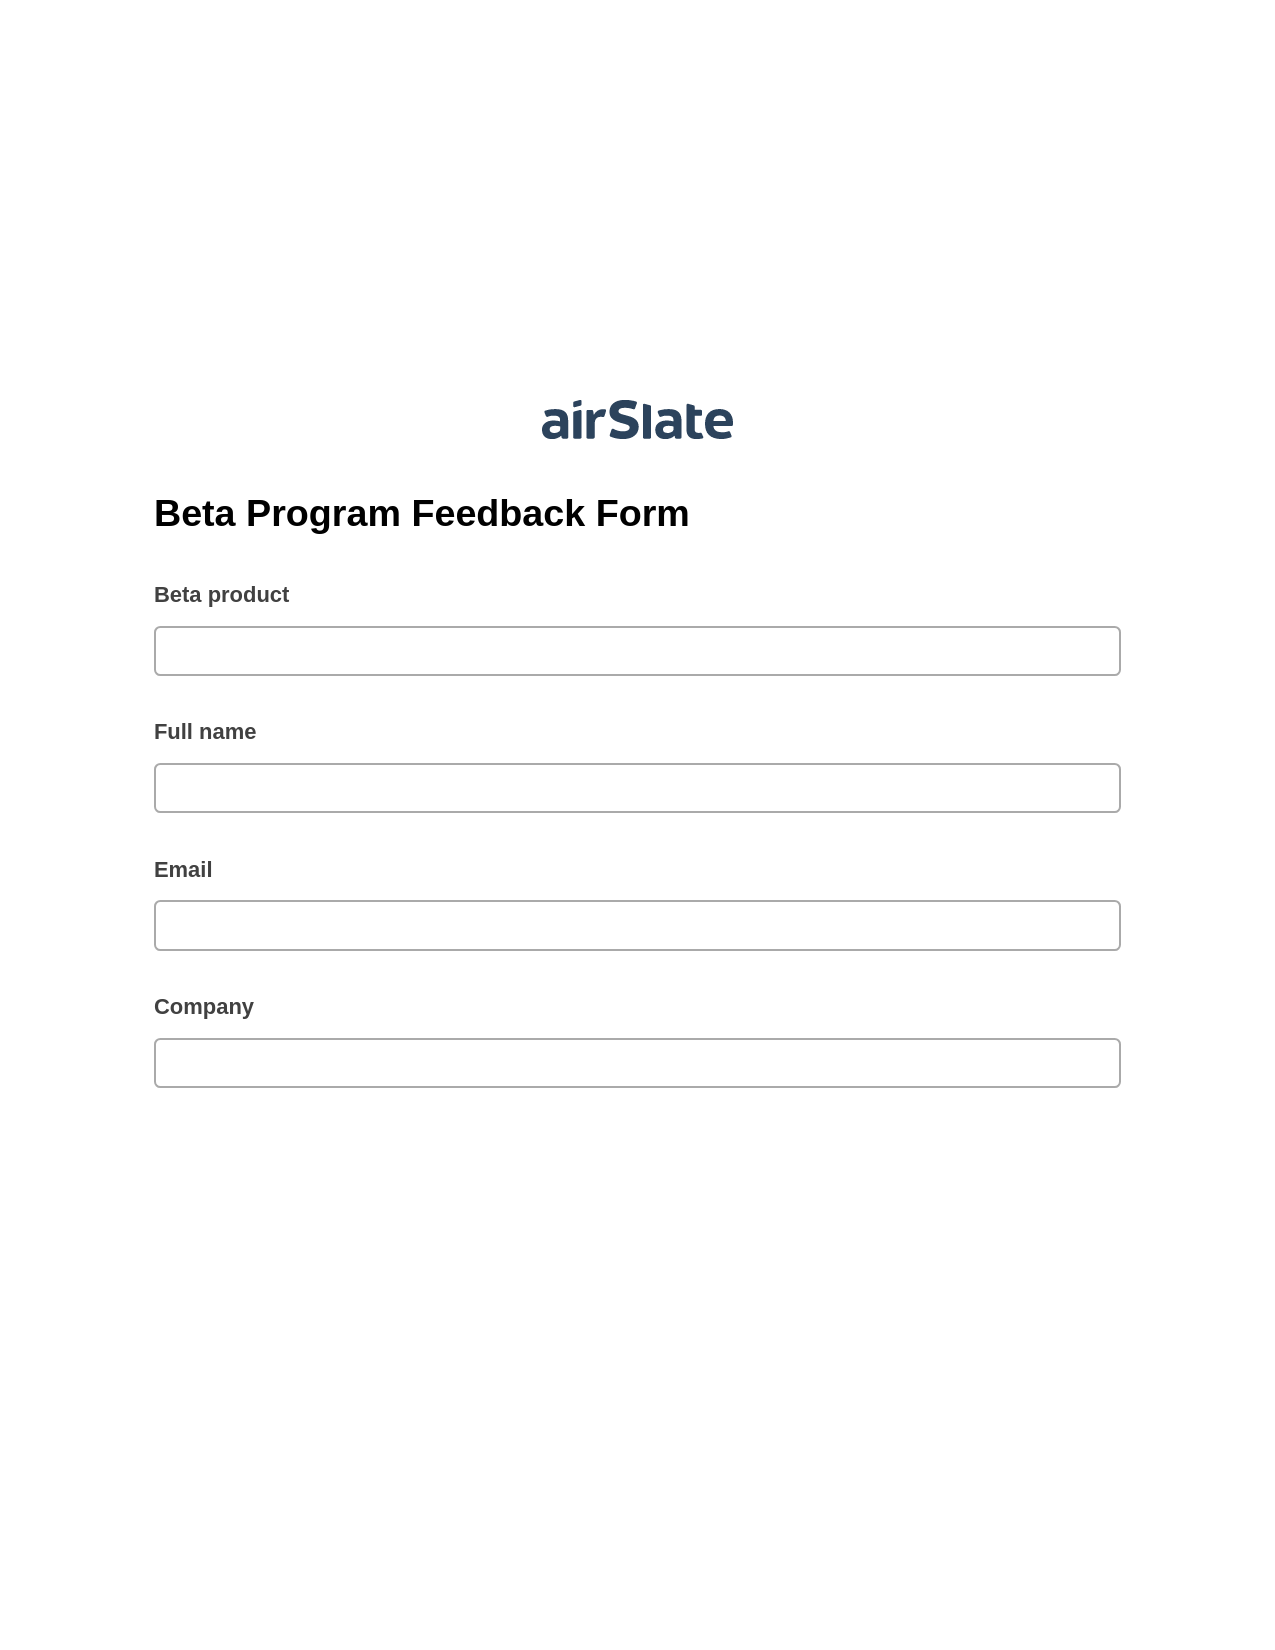 Multirole Beta Program Feedback Form Pre-fill Dropdown from Airtable, Add Tags to Slate Bot, Export to Excel 365 Bot